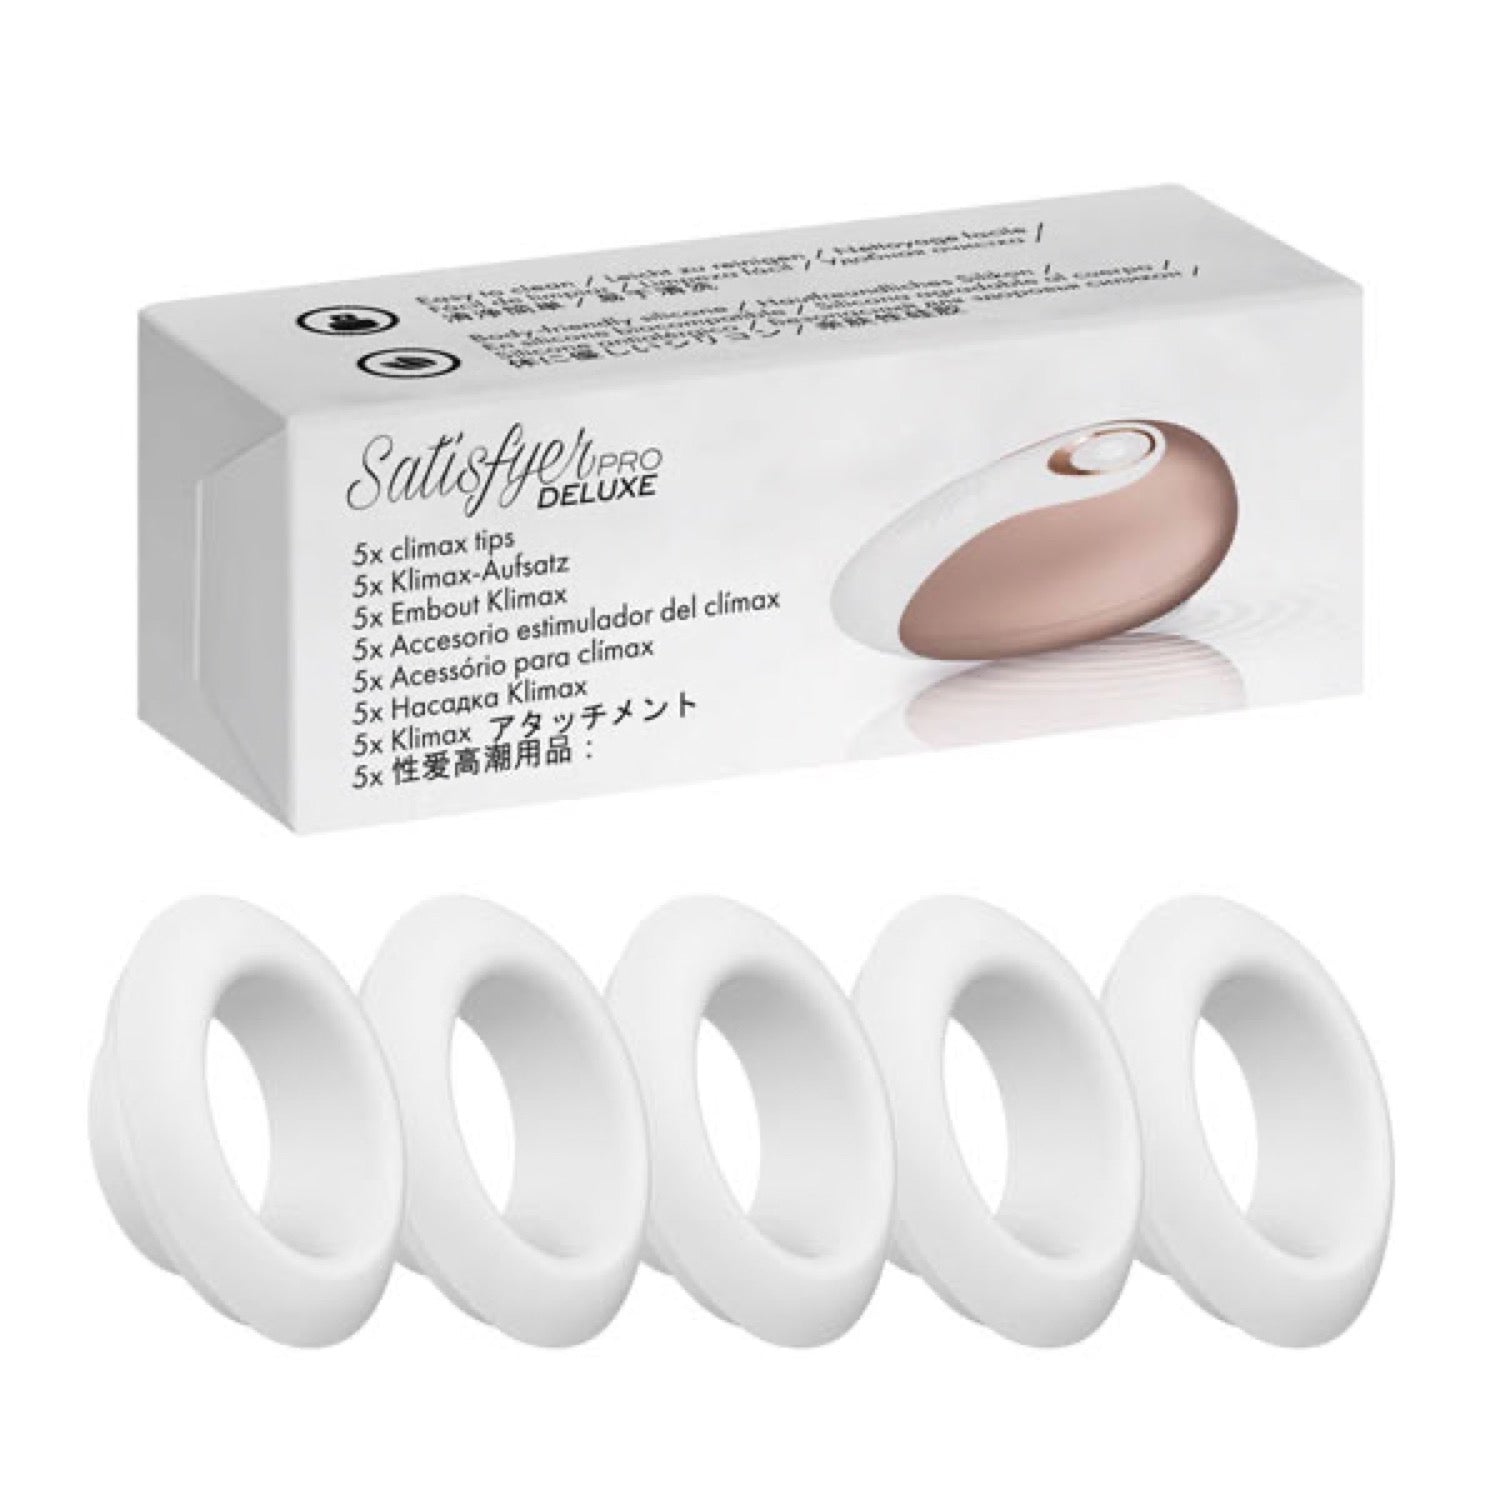 Satisfyer Pro Deluxe Climax Heads - White by Satisfyer